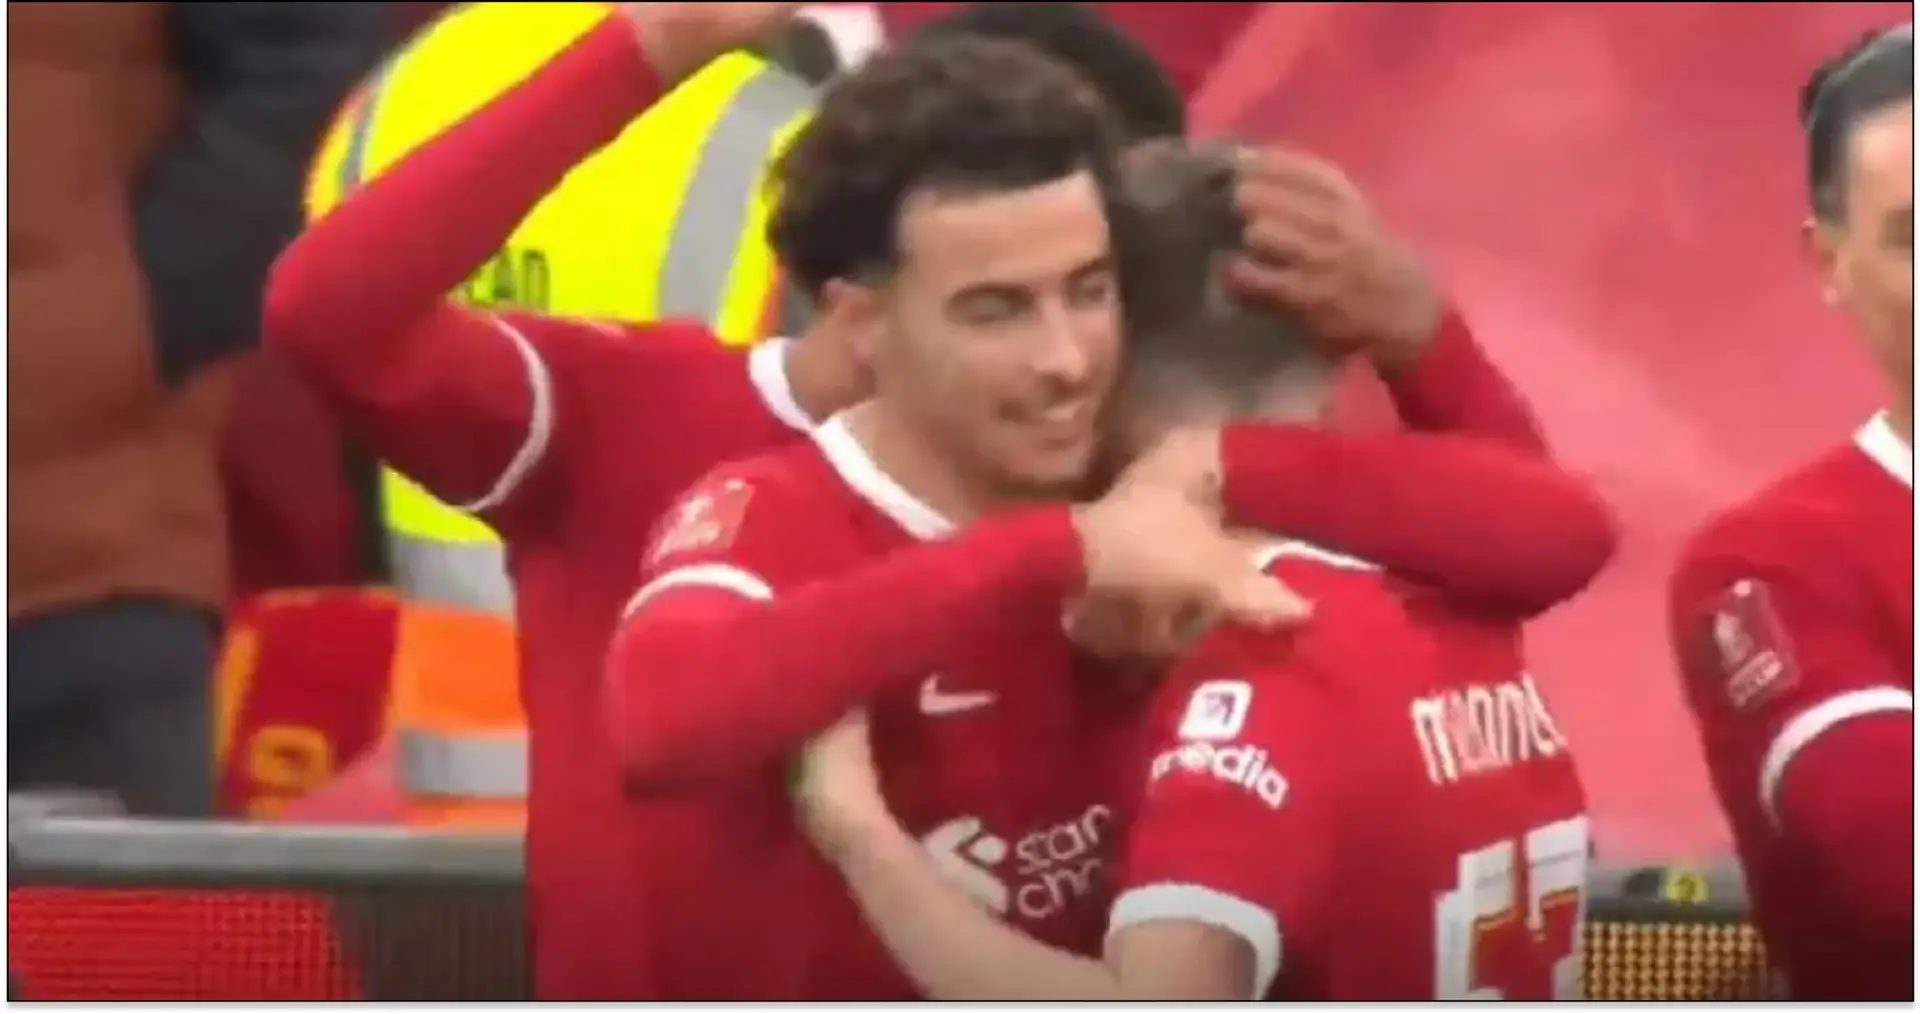 McConnell provides Trent-esque assist on first Liverpool start — video